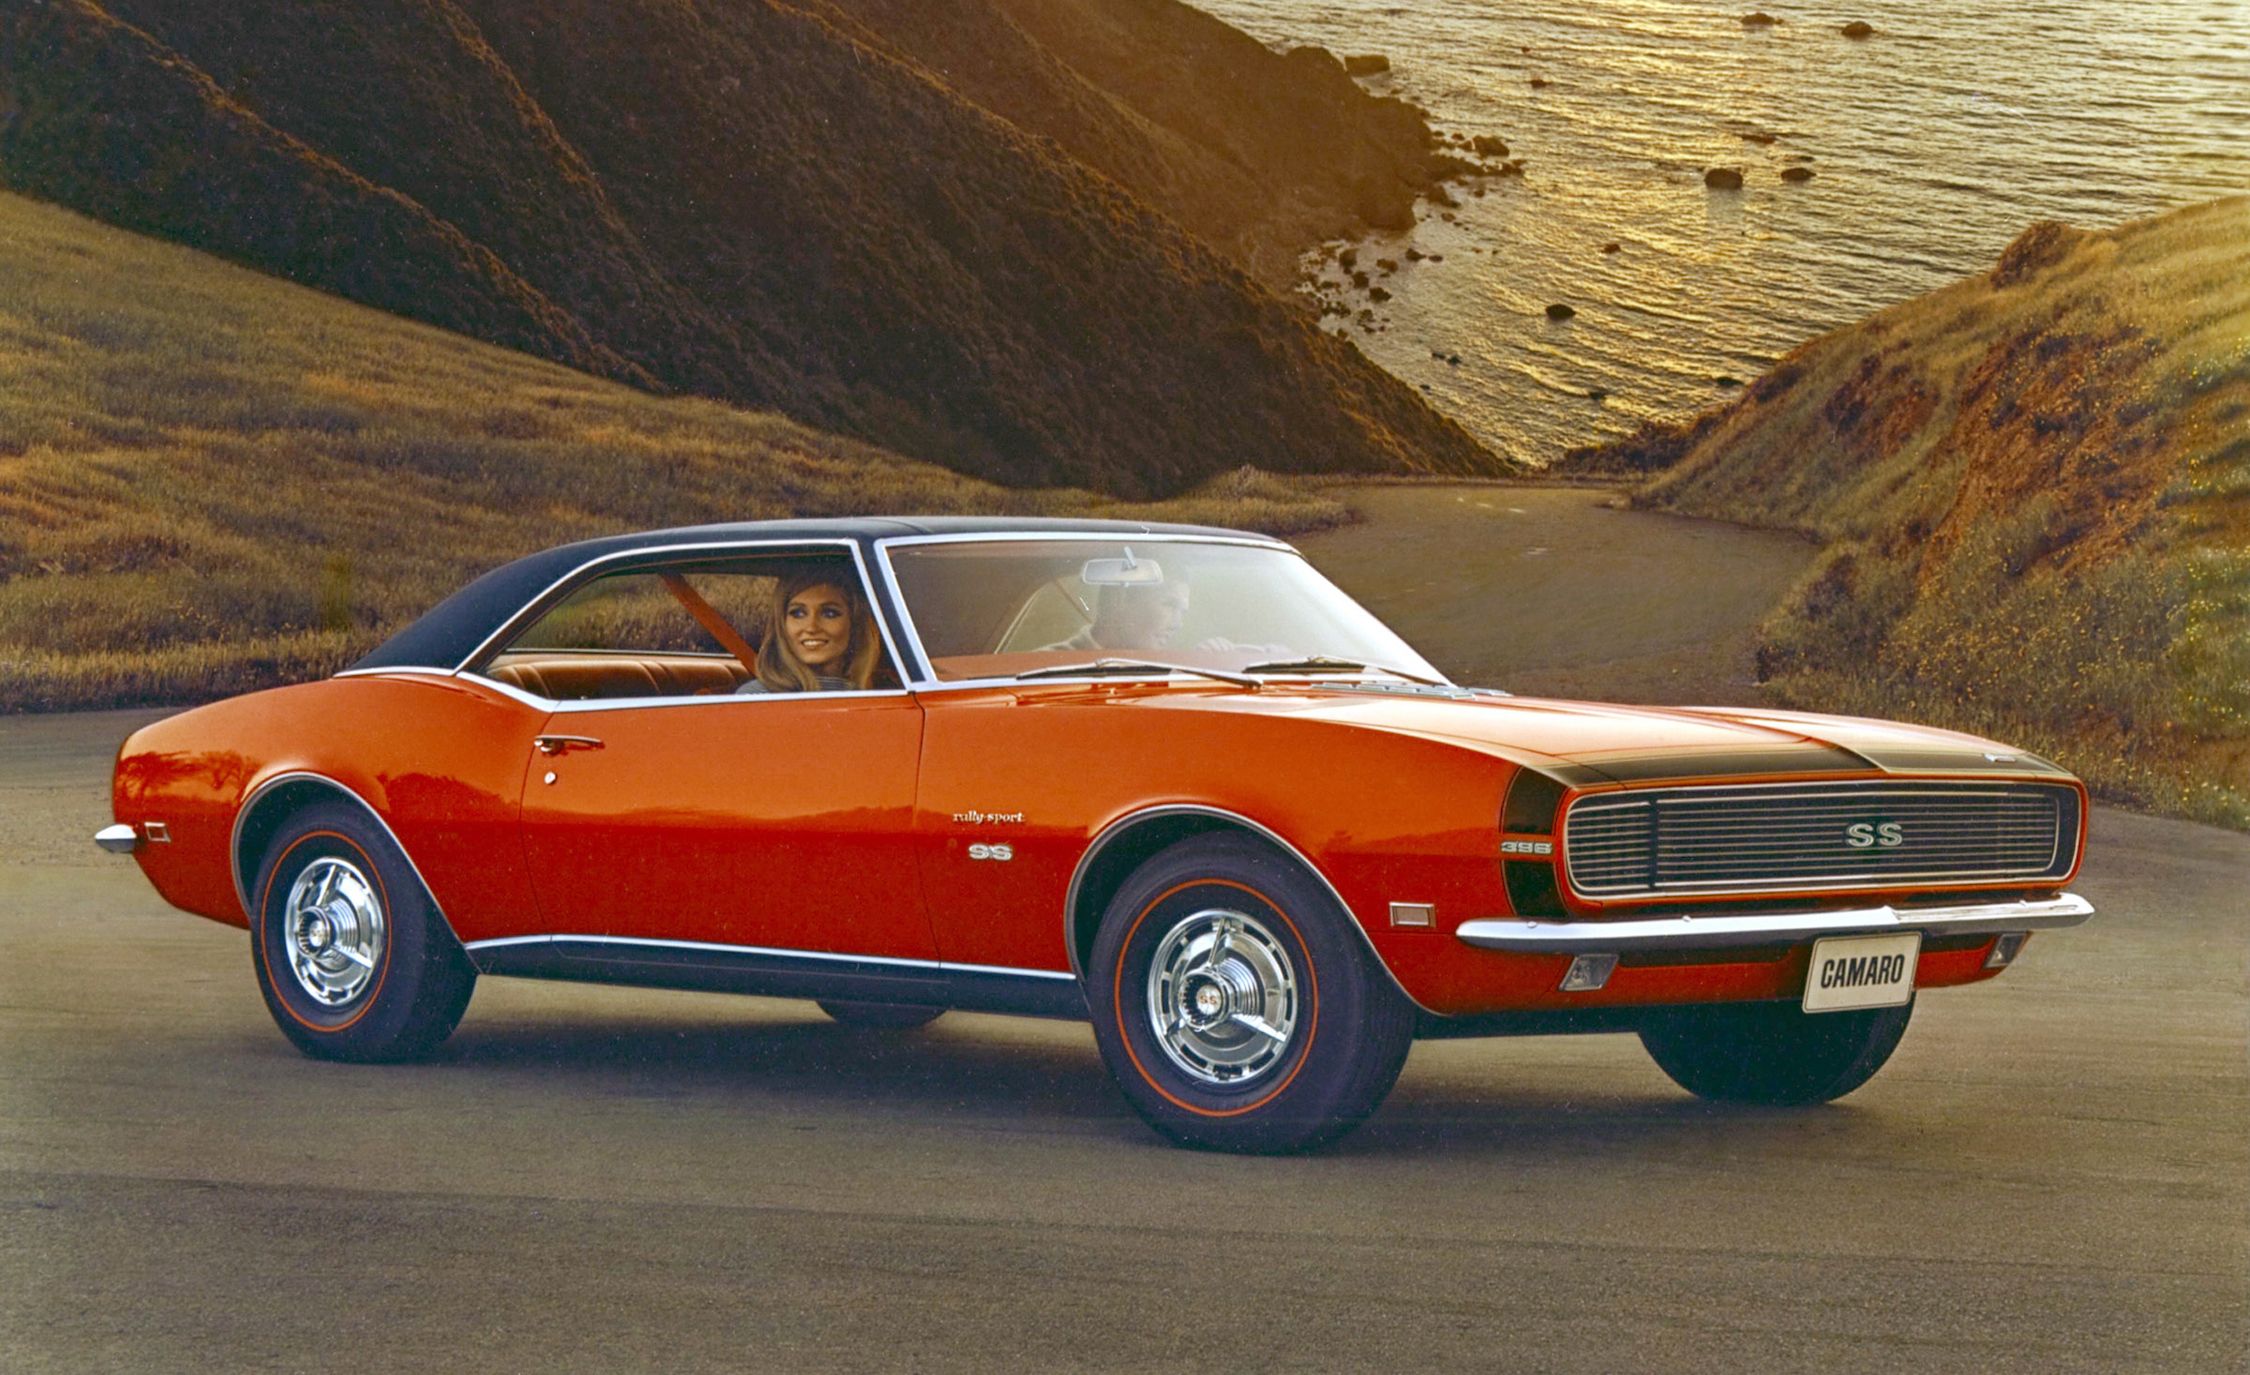 History of the Chevrolet Camaro, from 1967 to Today